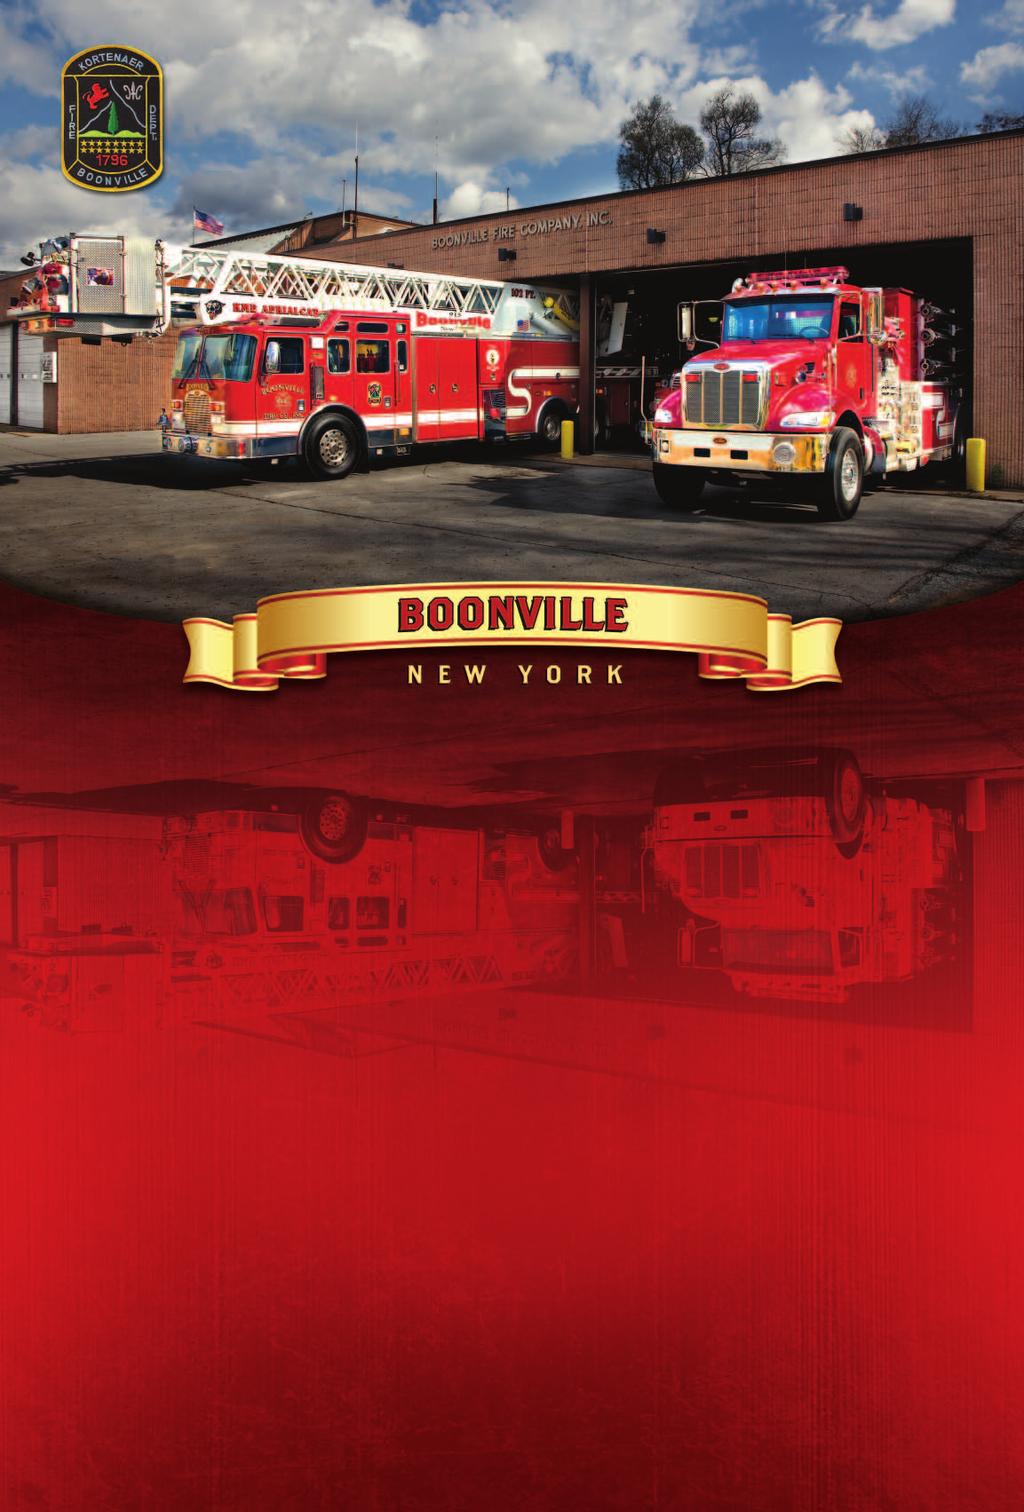 Boonville Volunteer Fire Company Proudly Serving the Boonville Community Since 1892 AUGUST JULY 1 2 3 4 5 6 7 8 9 10 11 12 13 14 15 16 17 18 19 20 21 22 23 24 25 26 27 28 29 30 31 SEP TEMBER 1 2 3 4